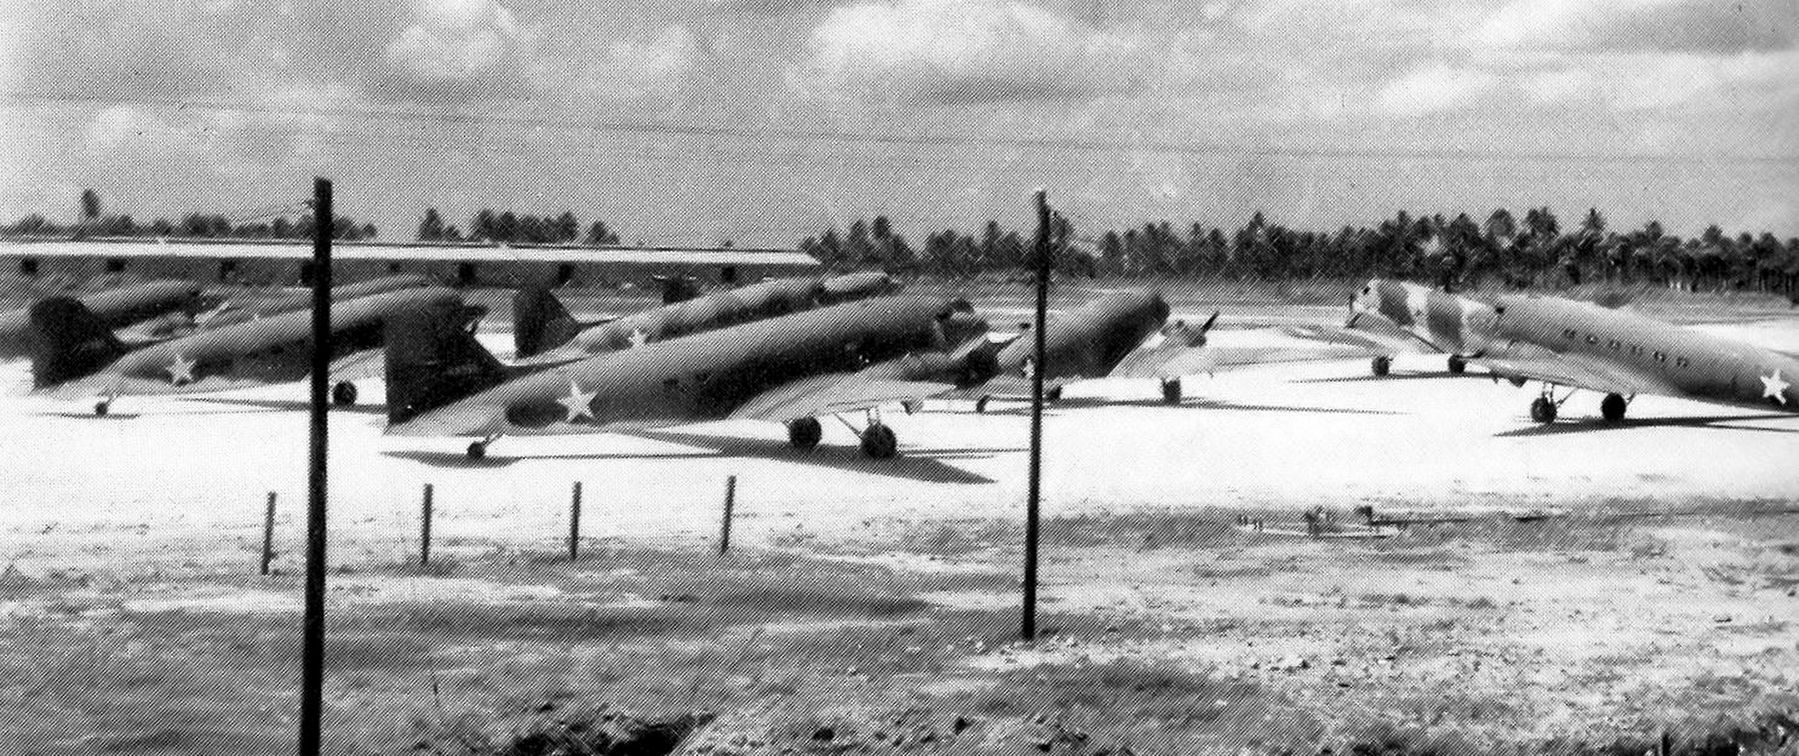 20th Transport Squadron C-47 aircraft  Howard Field, Panama, 1943 image. Click for full size.